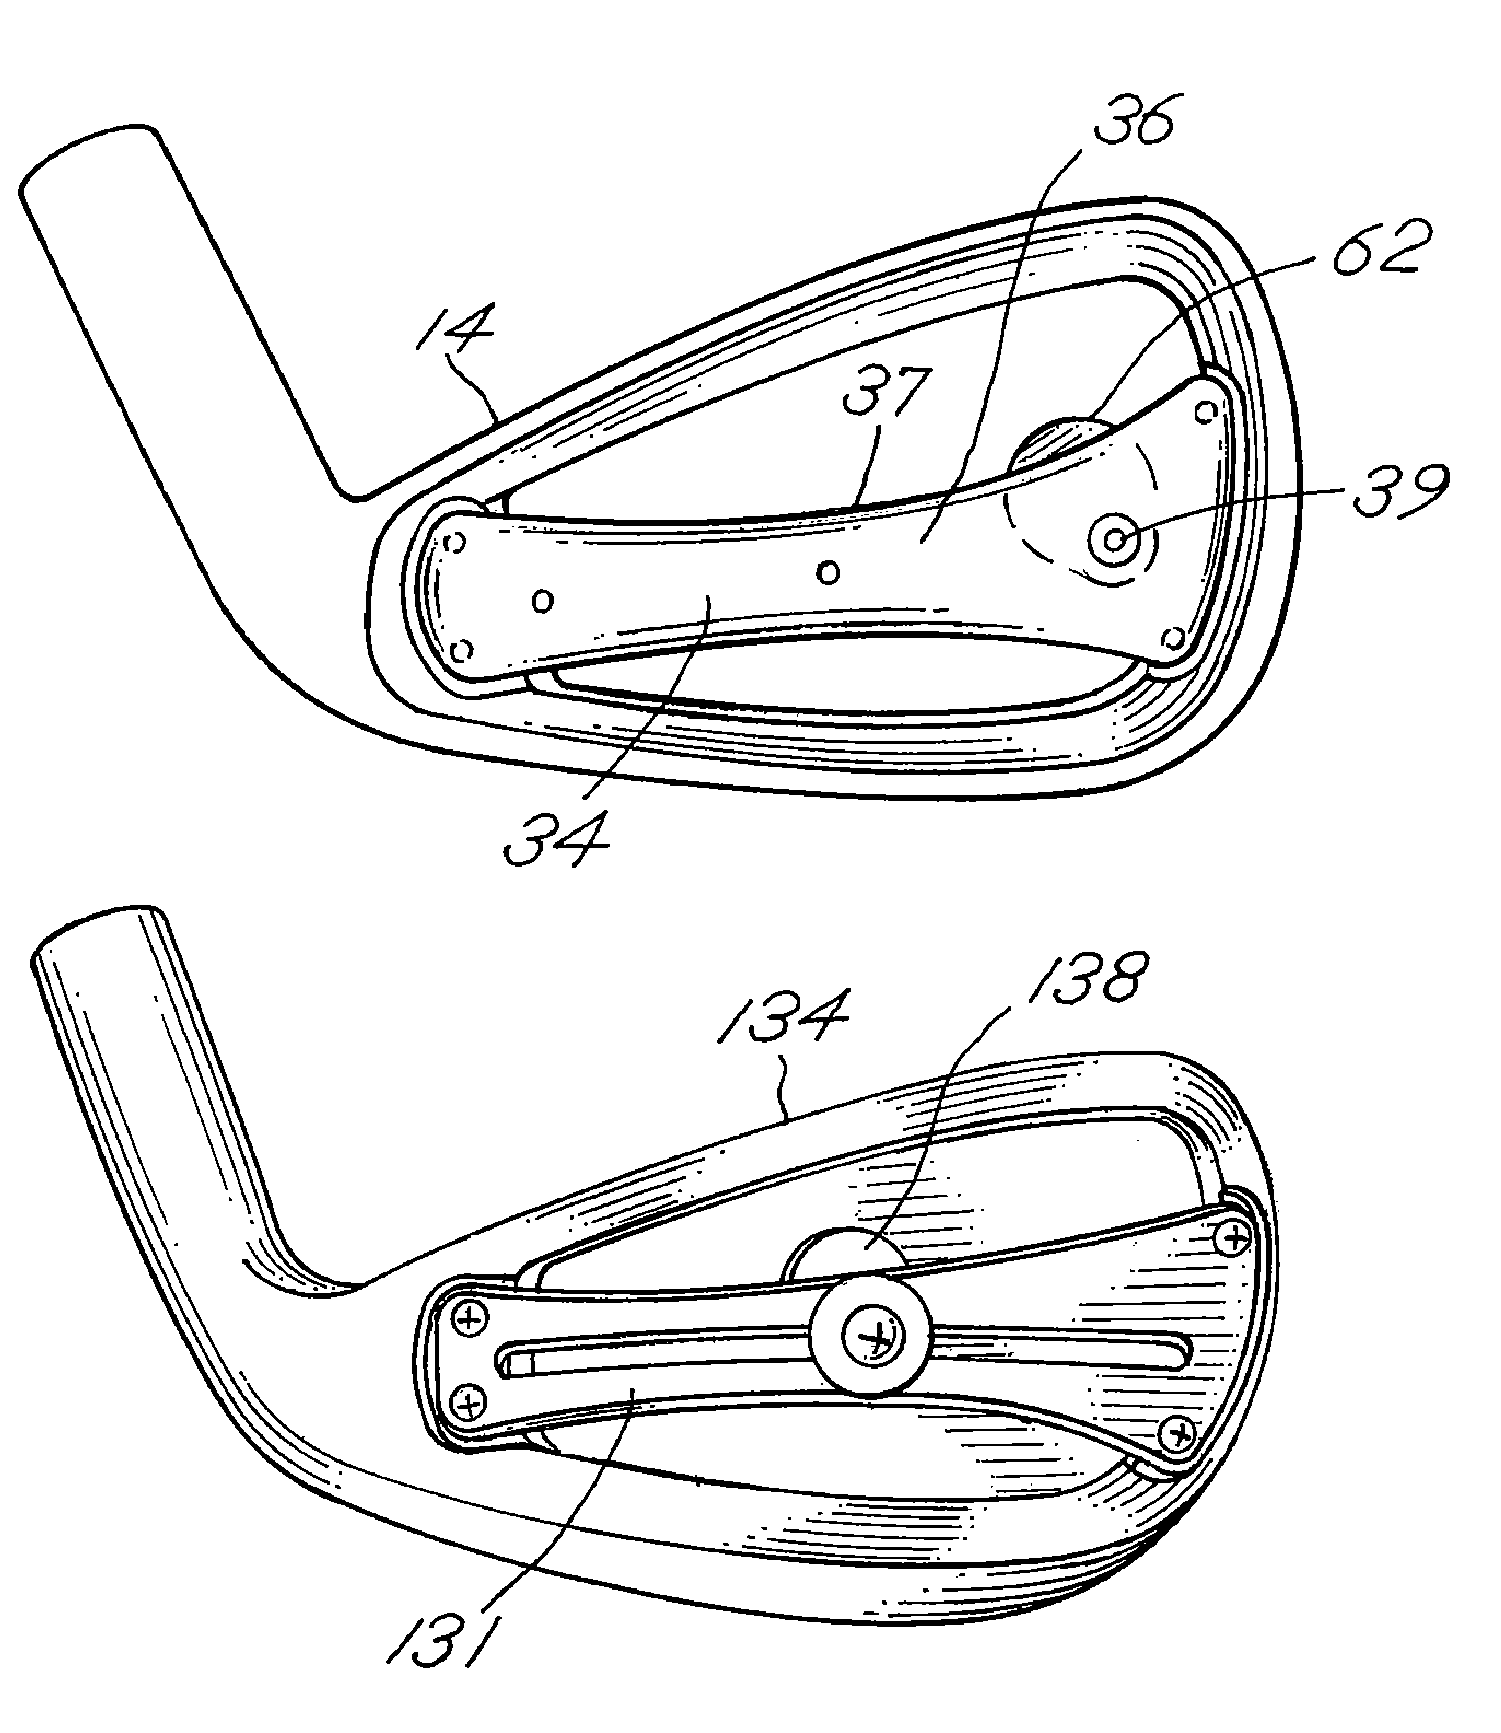 Golf club head having a bridge member and a weight positioning system